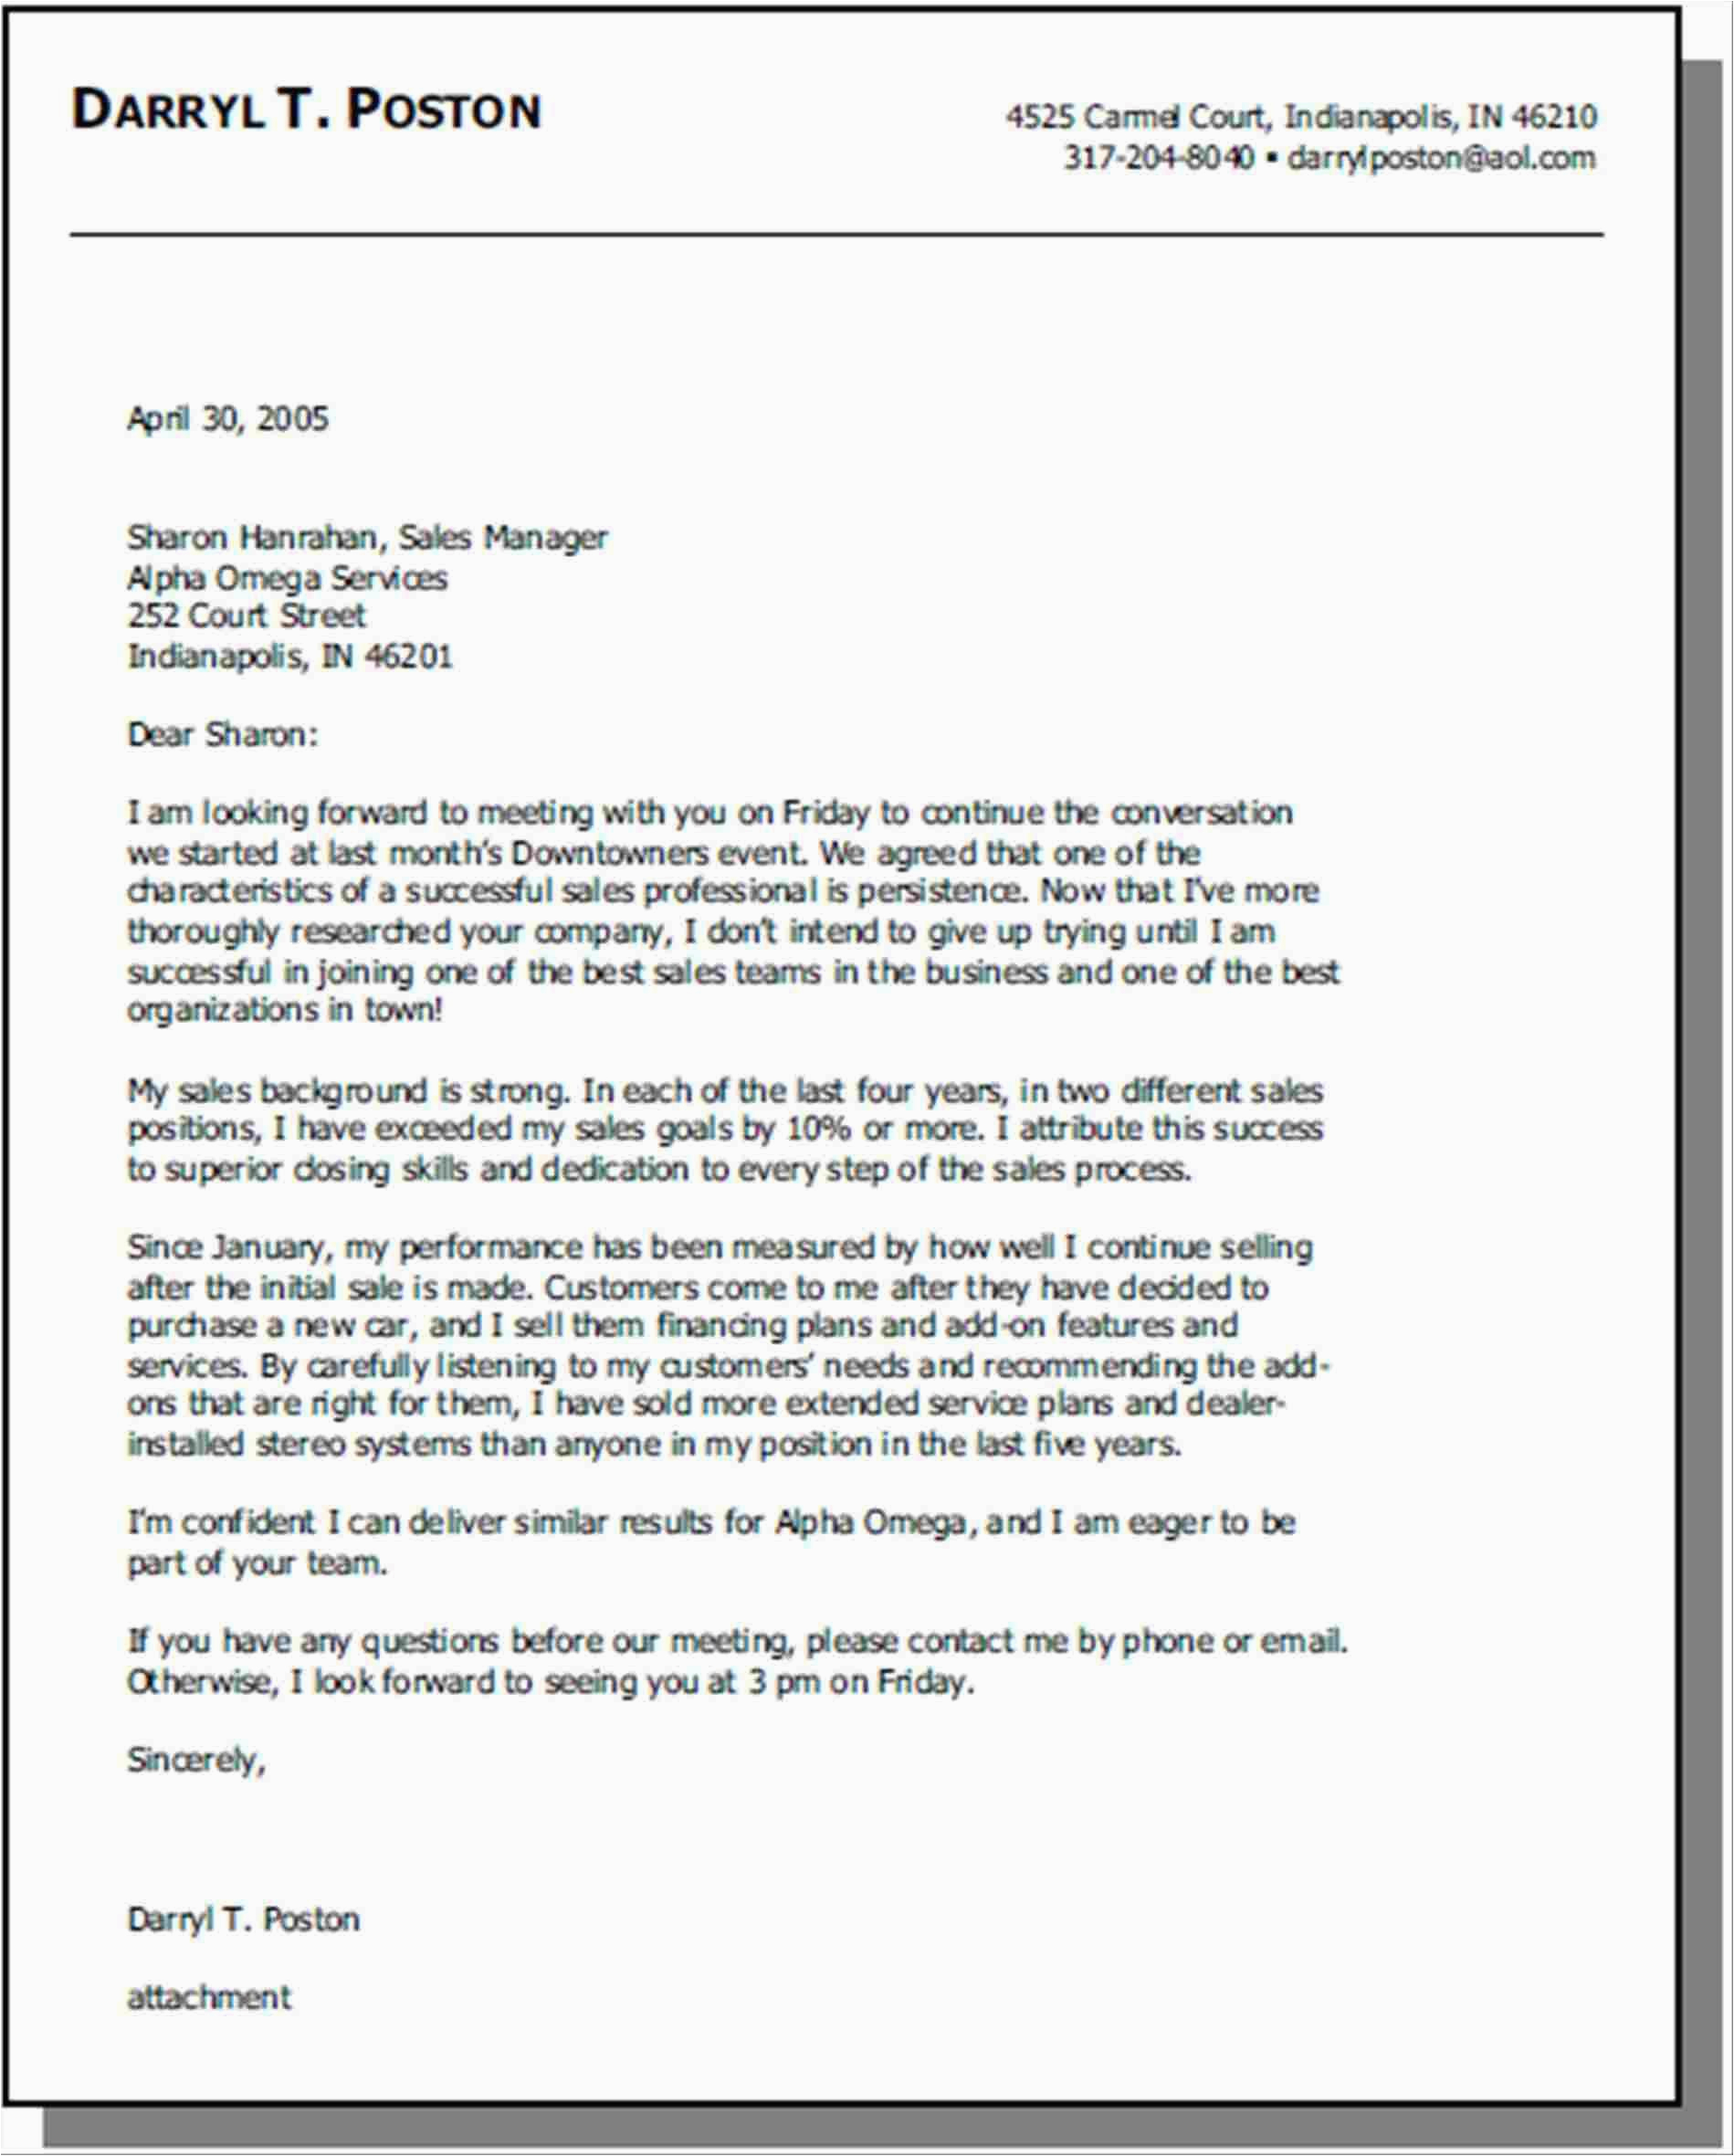 Sample Letter Requestion Resumes for Opening Position Open solicitation Cover Letter Example